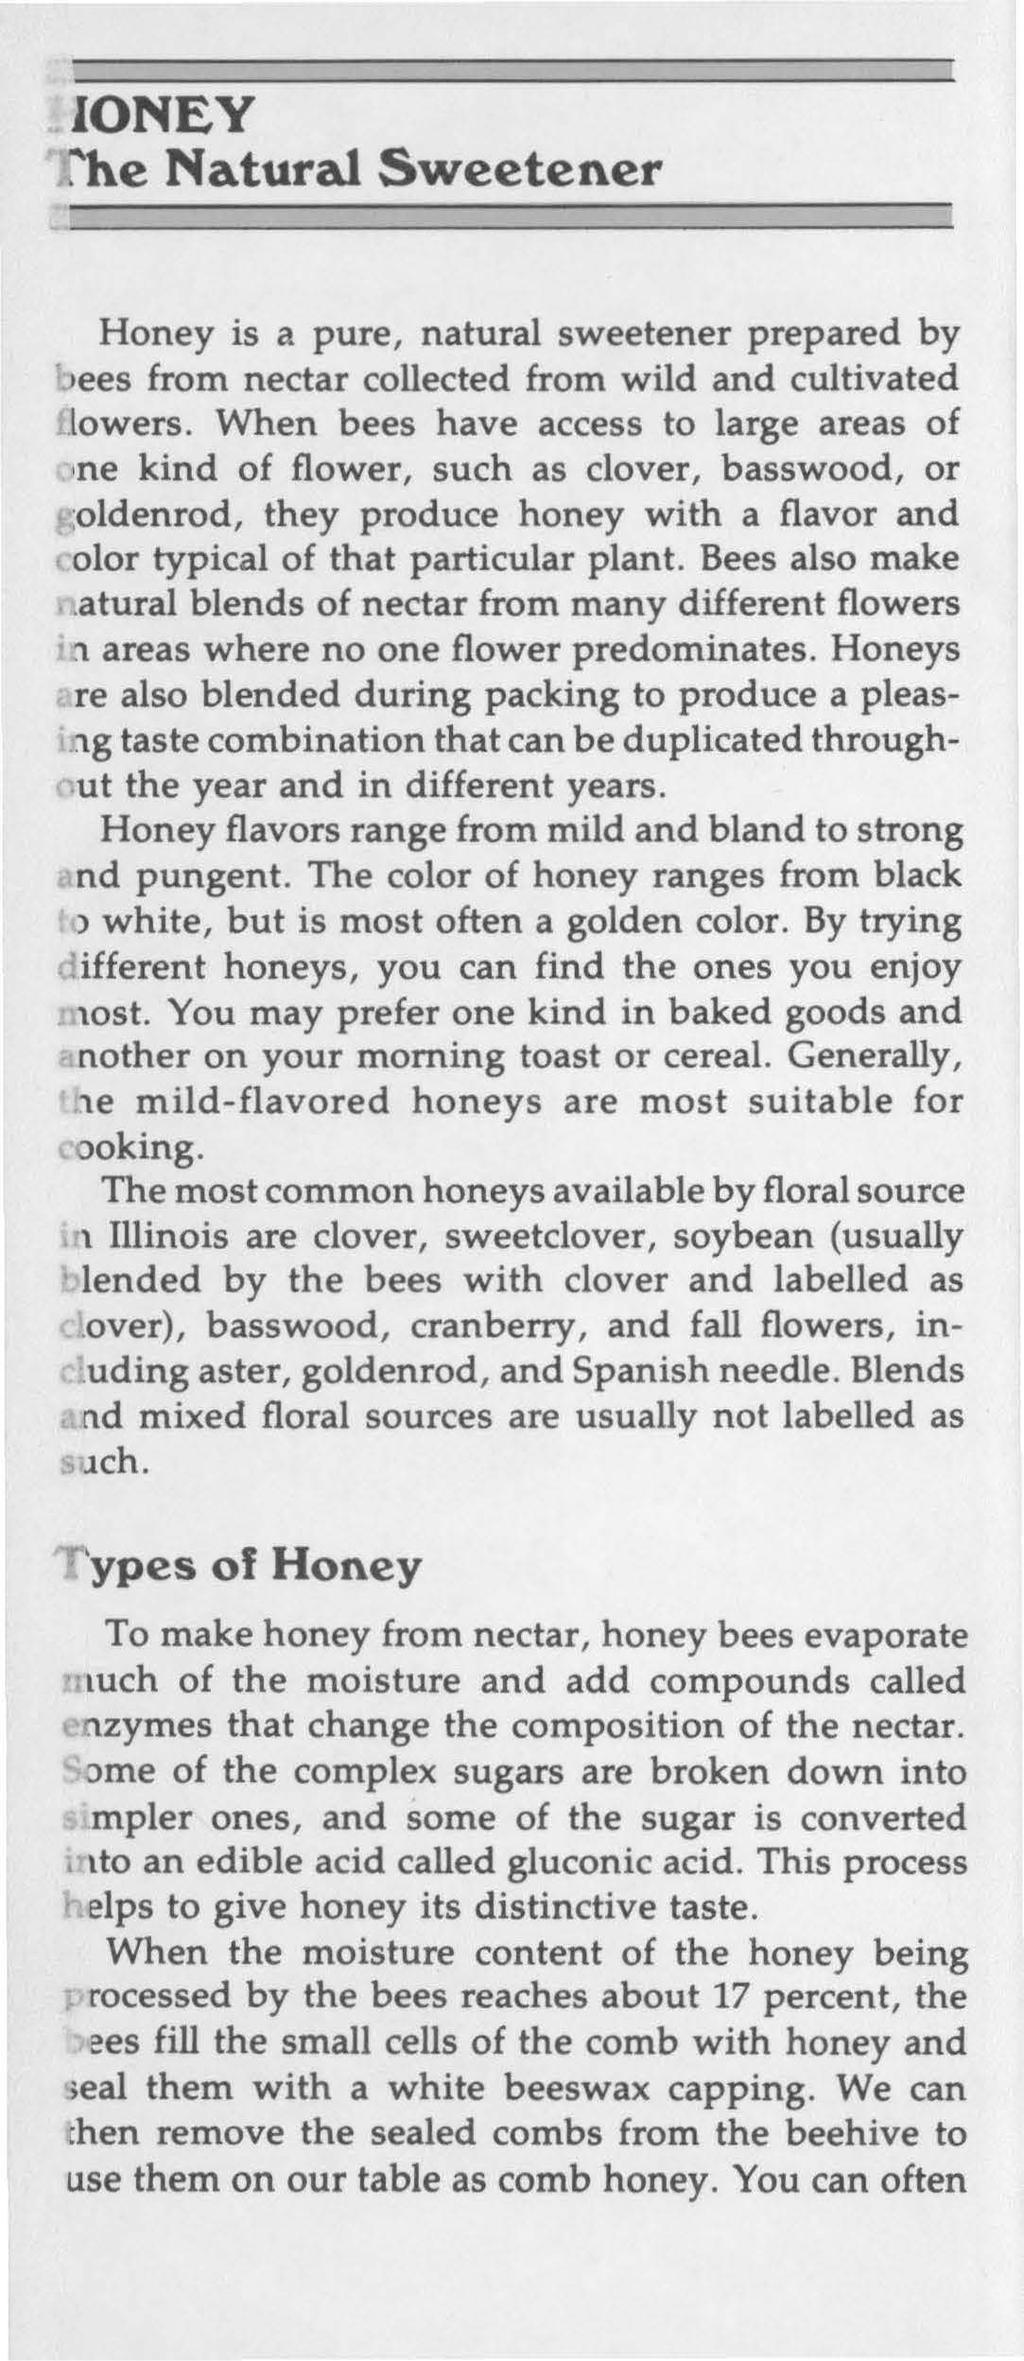 loney e Natural Sweetener Honey is a pure, natural sweetener prepared by ees from nectar collected from wild and cultivated.lowers.